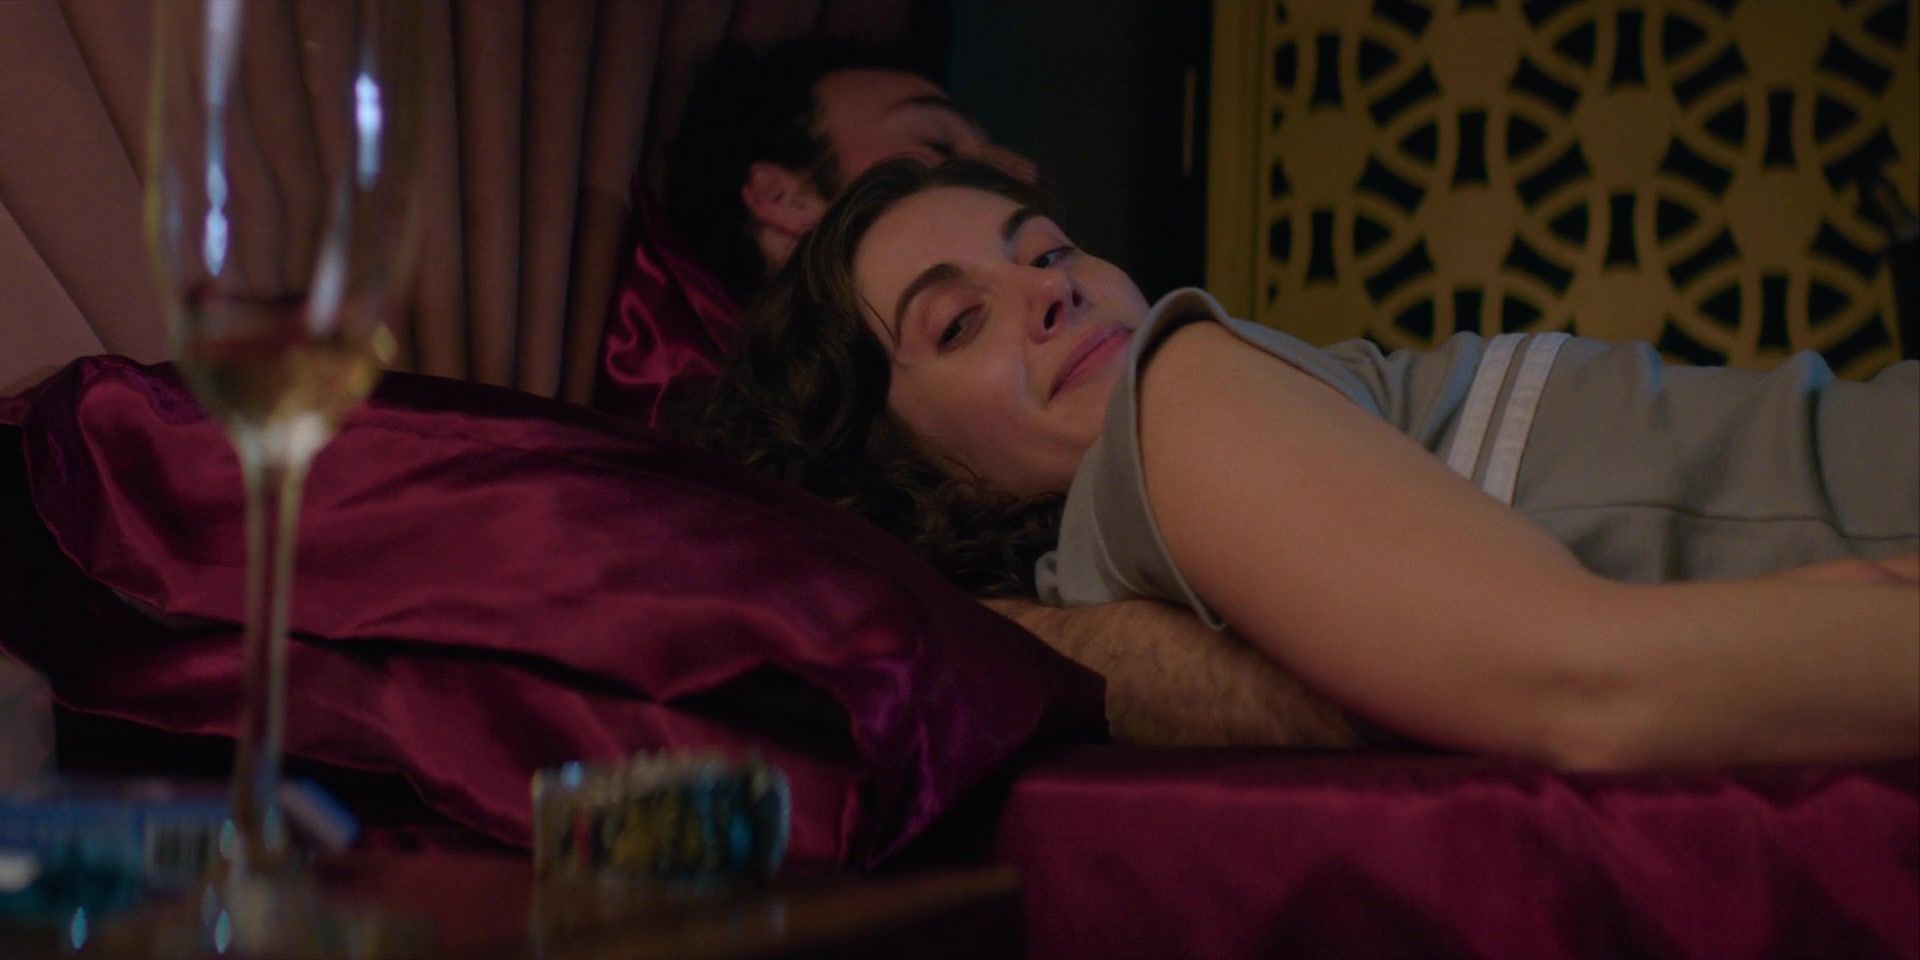 Perfect Teen Betty Gilpin, Alison Brie nude - Glow s03e04 (2019) Amazing